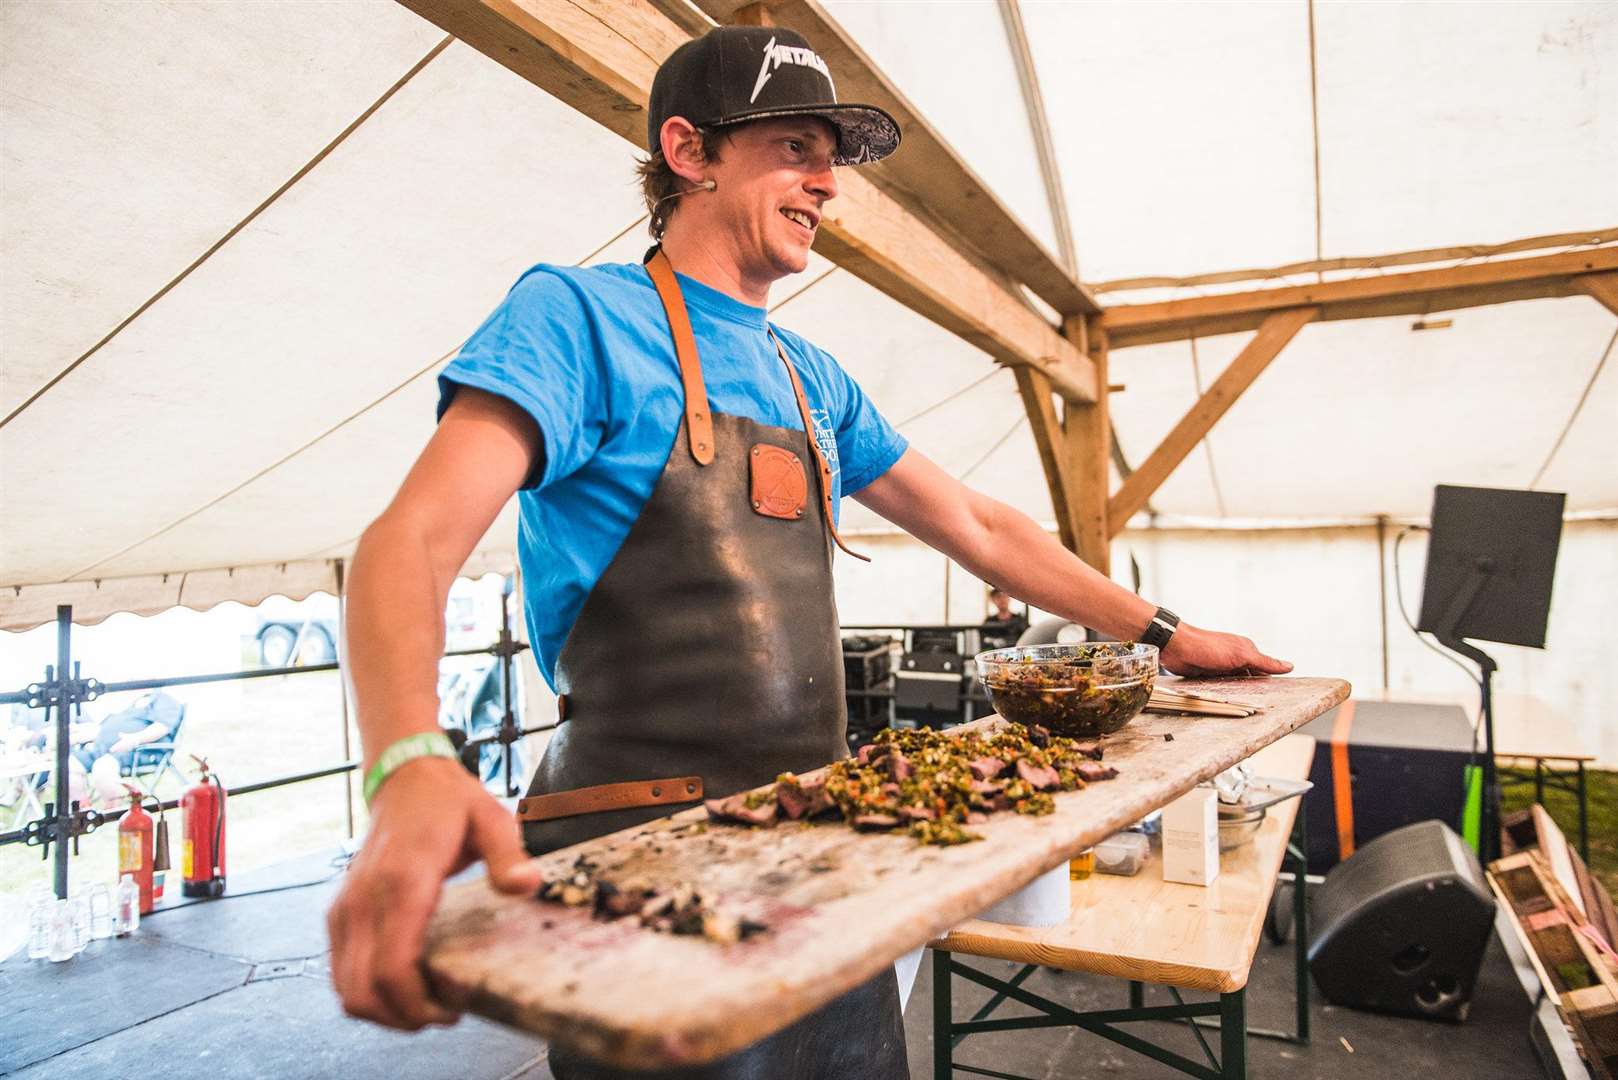 Black Deer Festival included Americana-style food and drink Picture: Caroline Faruolo